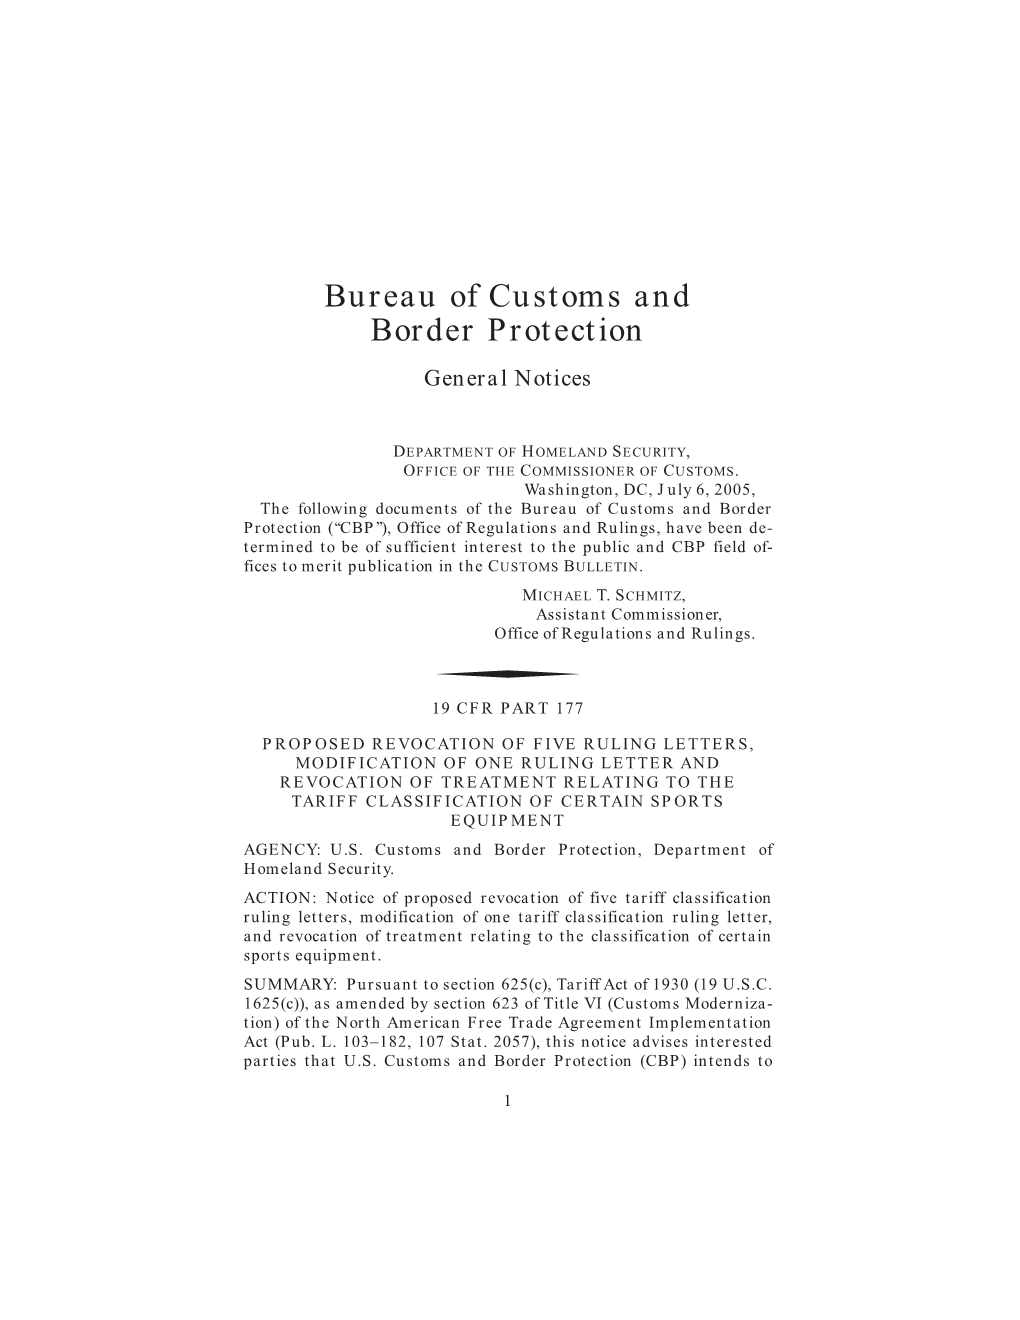 Bureau of Customs and Border Protection General Notices